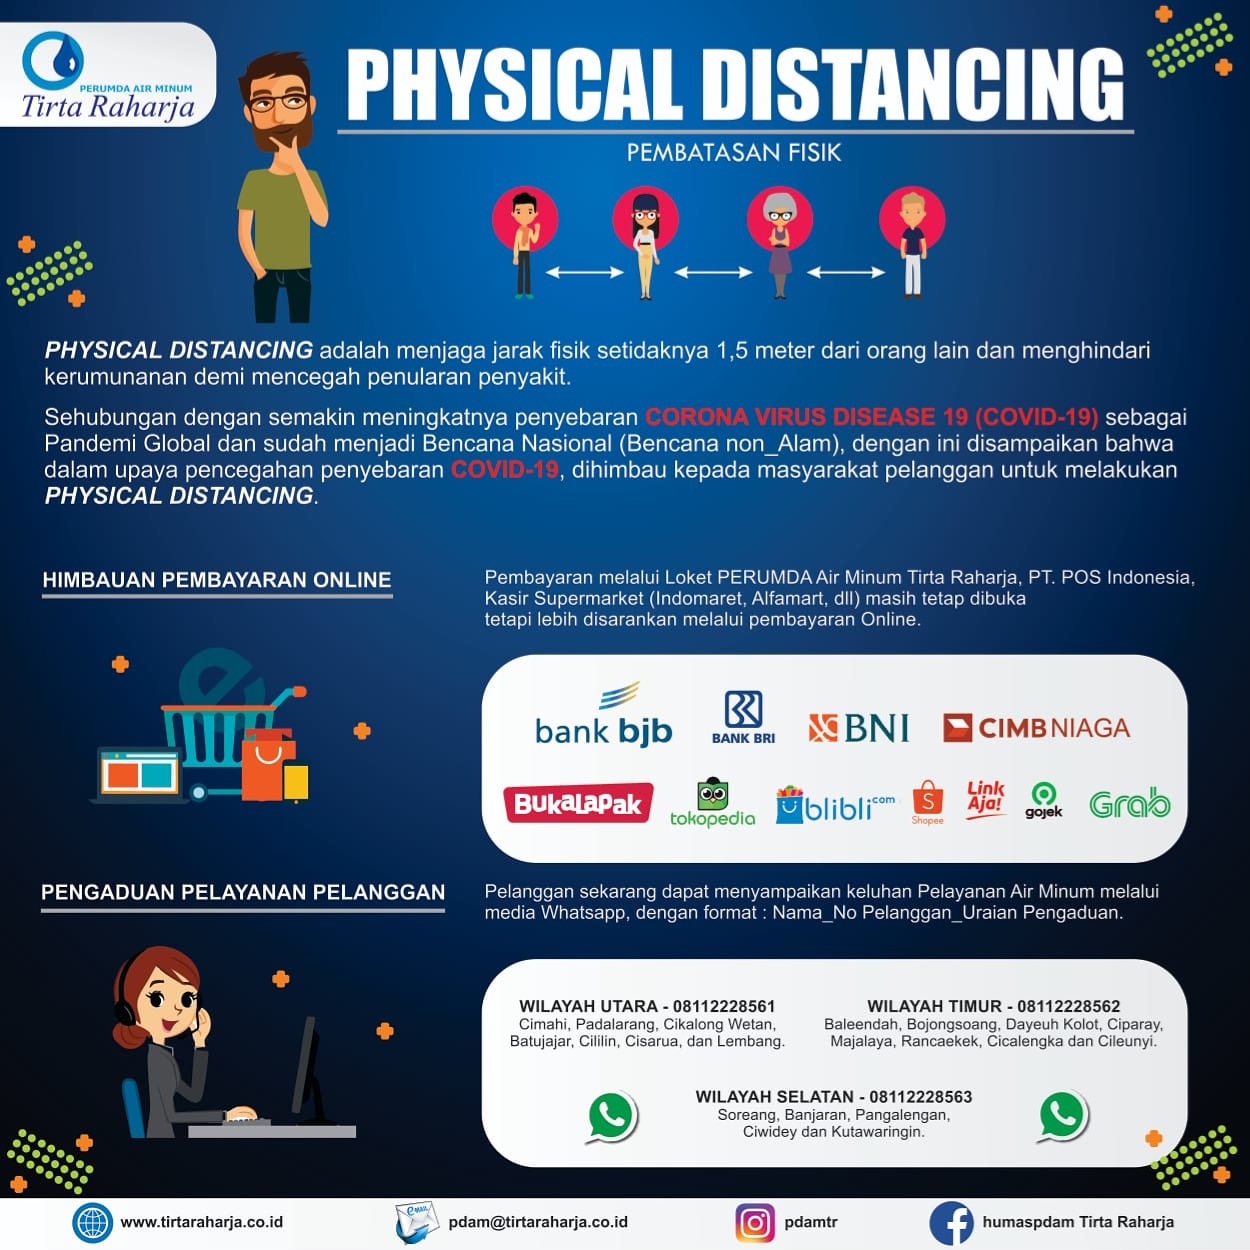 PHYSICAL DISTANCING